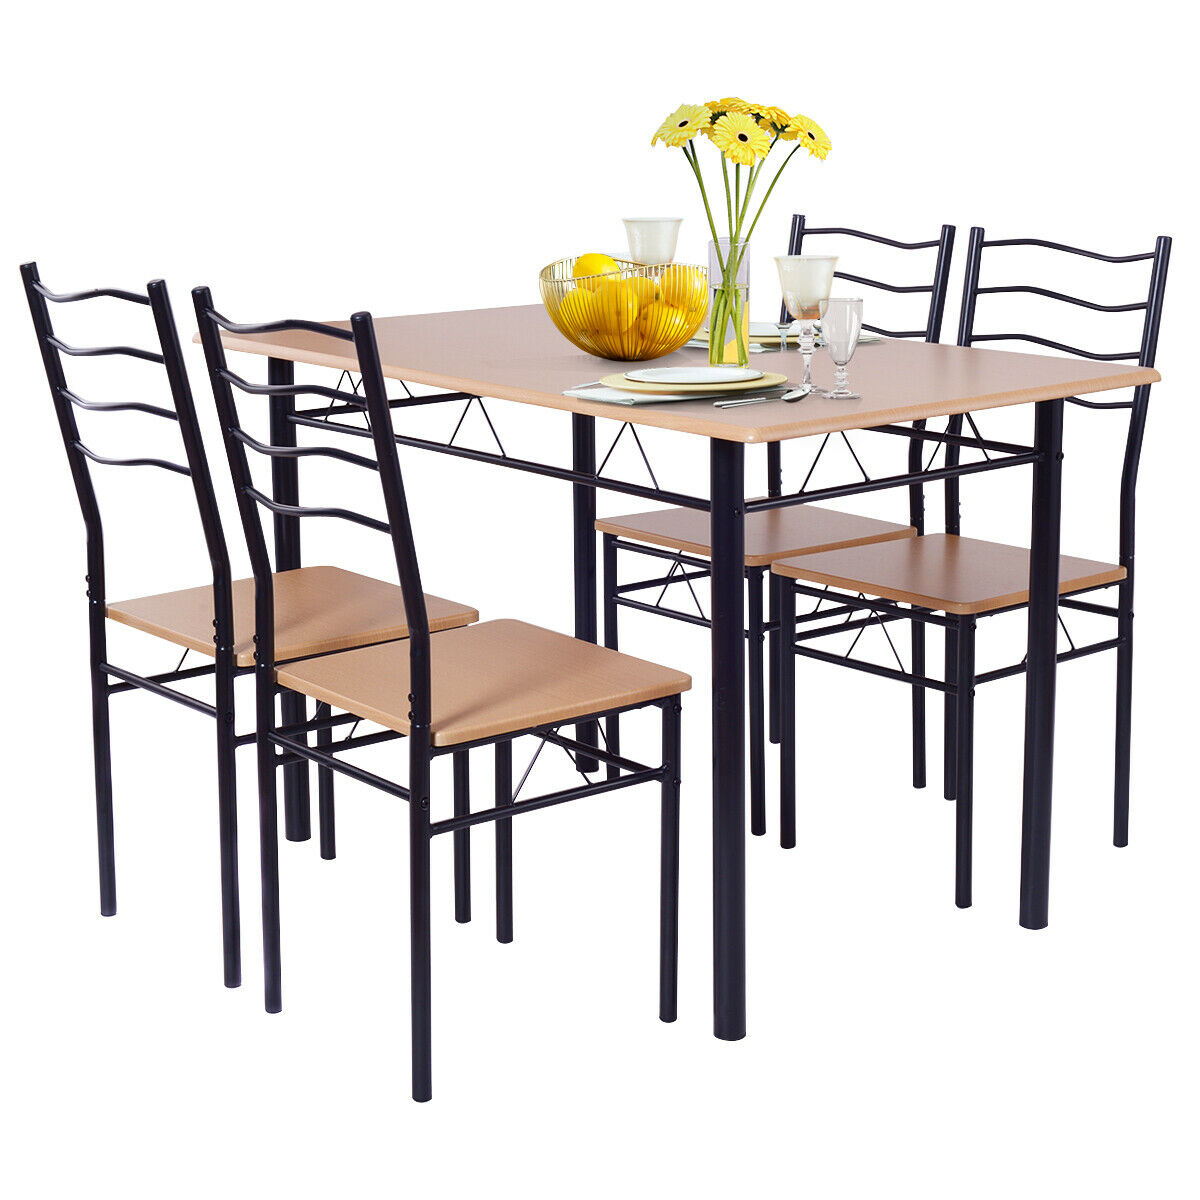 Costway 5 Piece Dining Table Set 29.5" with 4 Chairs Wood Metal Kitchen Breakfast Furniture Brown - image 1 of 8